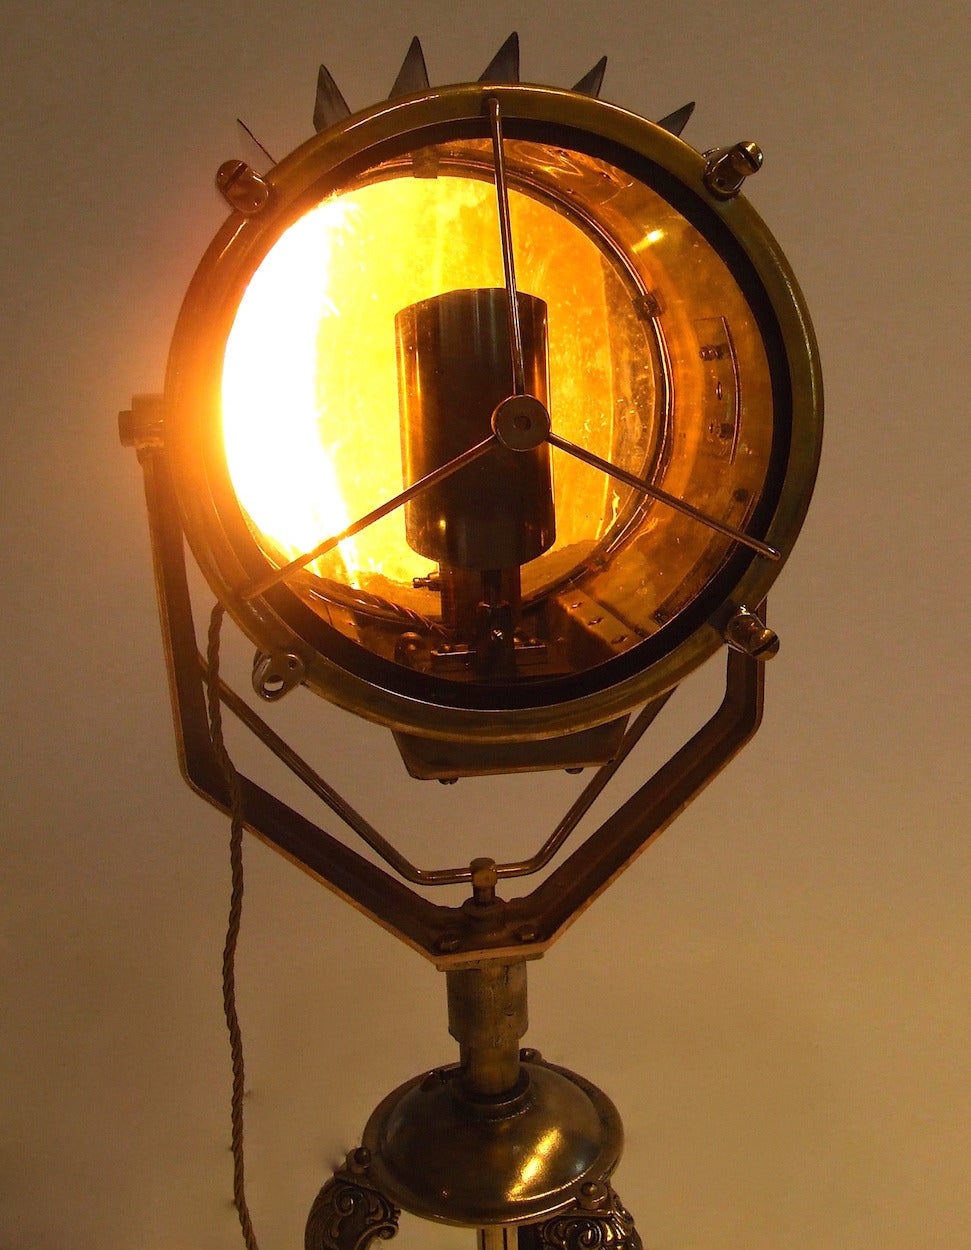 This elegant Francis searchlight was found in an antique shop.
It has done its service on European seas.
The lamp is made from brass entirely with bronze details, All gently polished and sits on a bronze Art Deco table tripod.
The lamp is